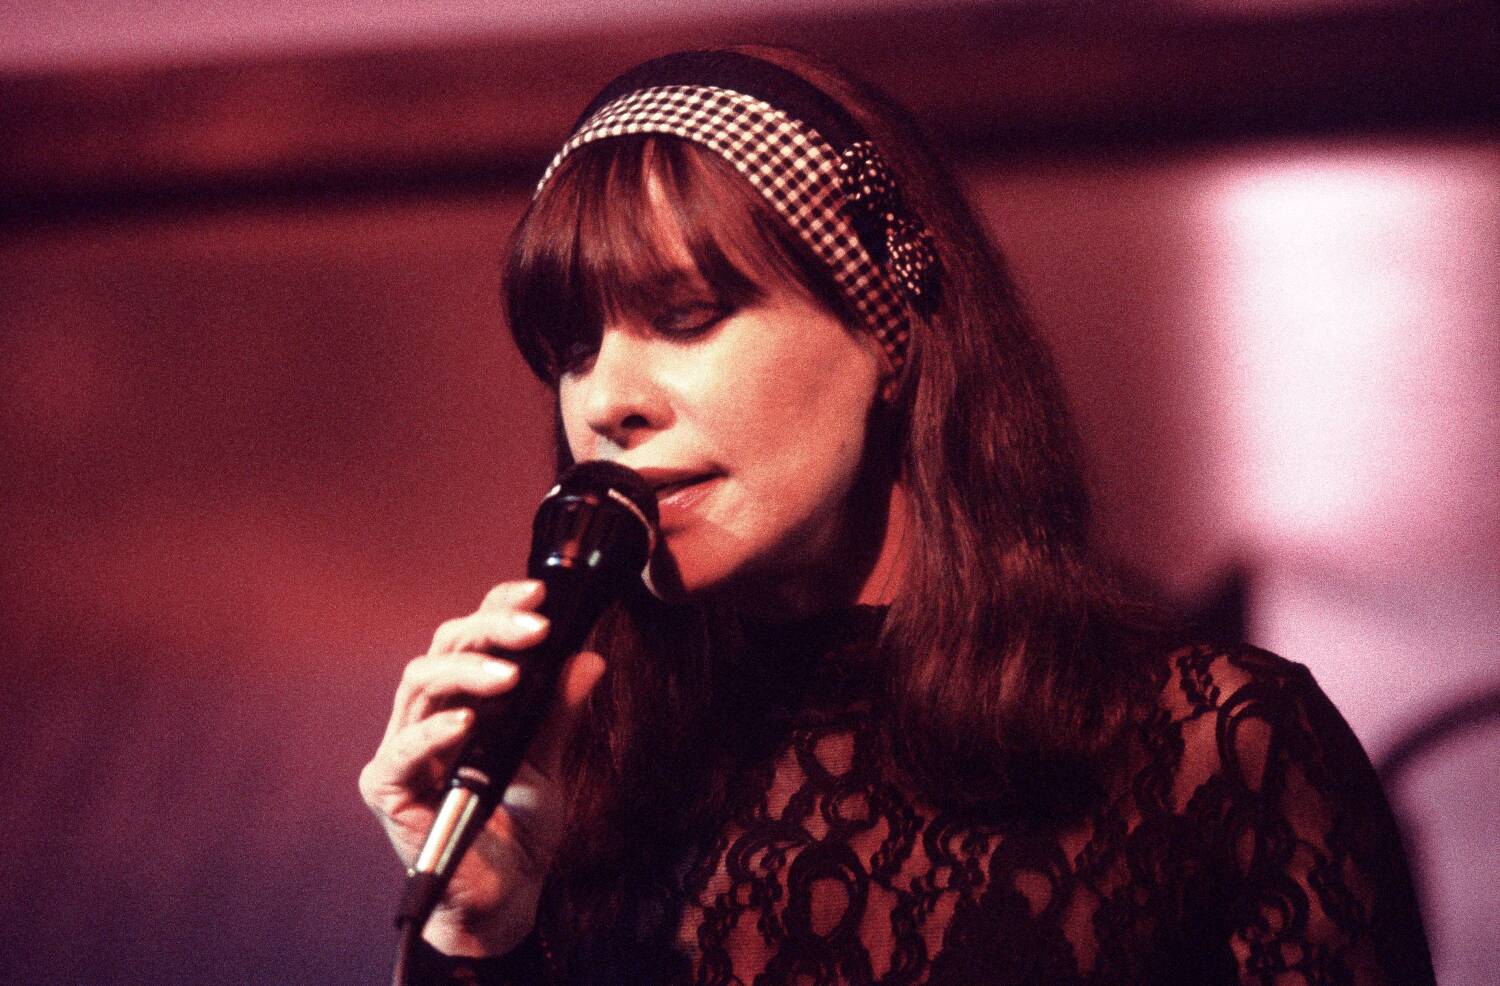 Astrud Gilberto, Brazilian singer who gave us 'The Girl From Ipanema,' dies at 83